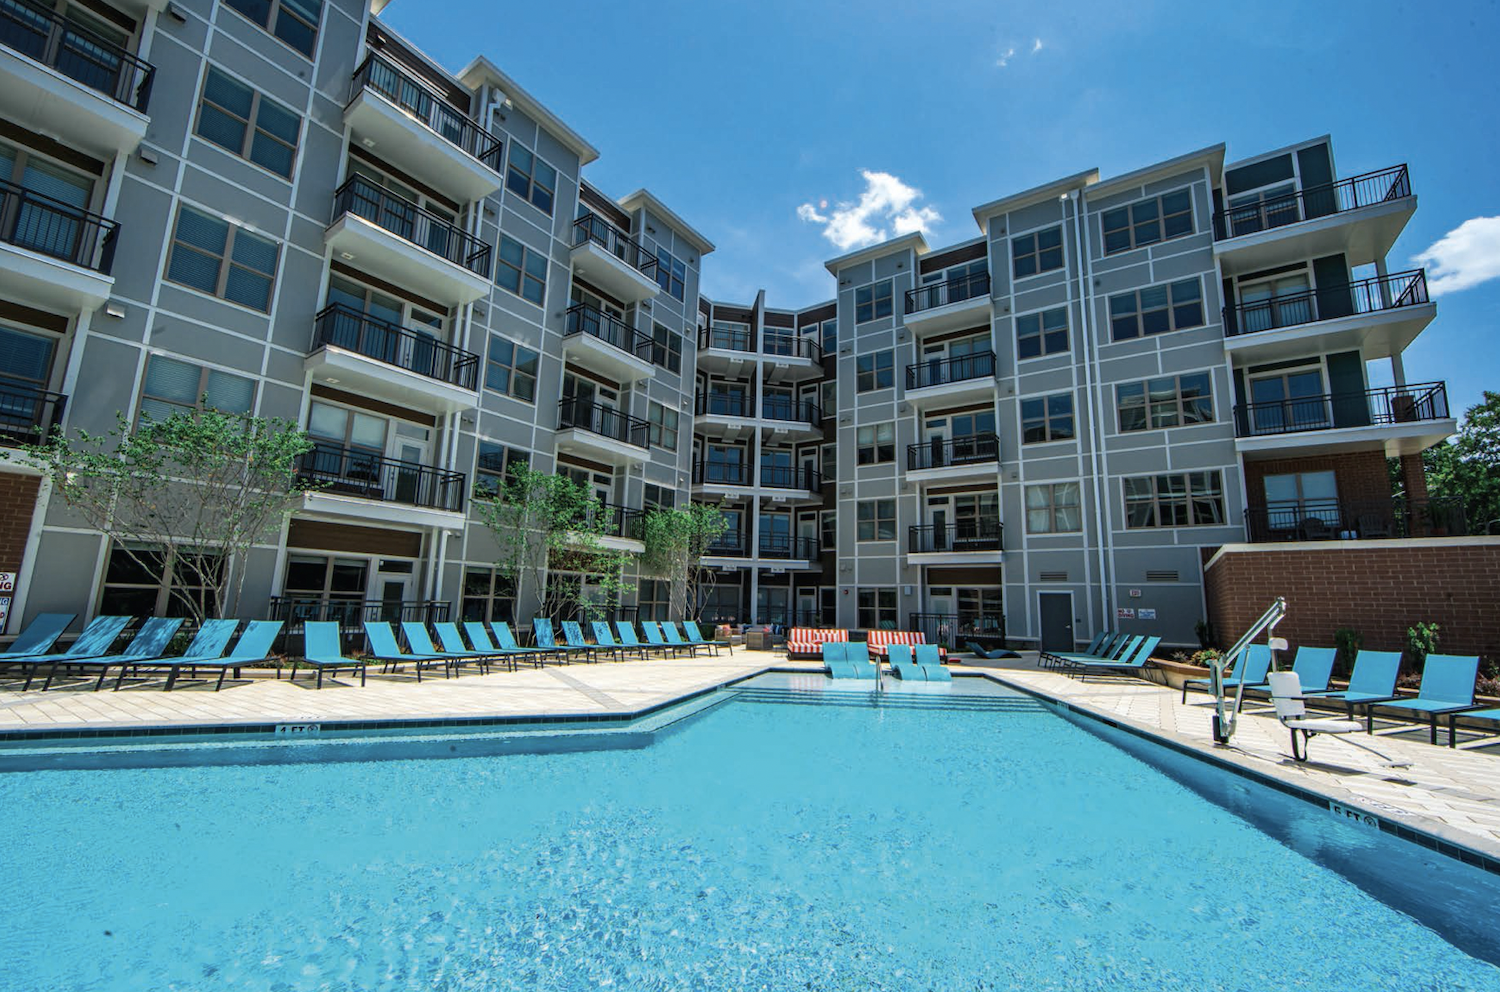 CORE Pacific Advisors Fully Subscribes DST Offering of Charlotte Multifamily Property